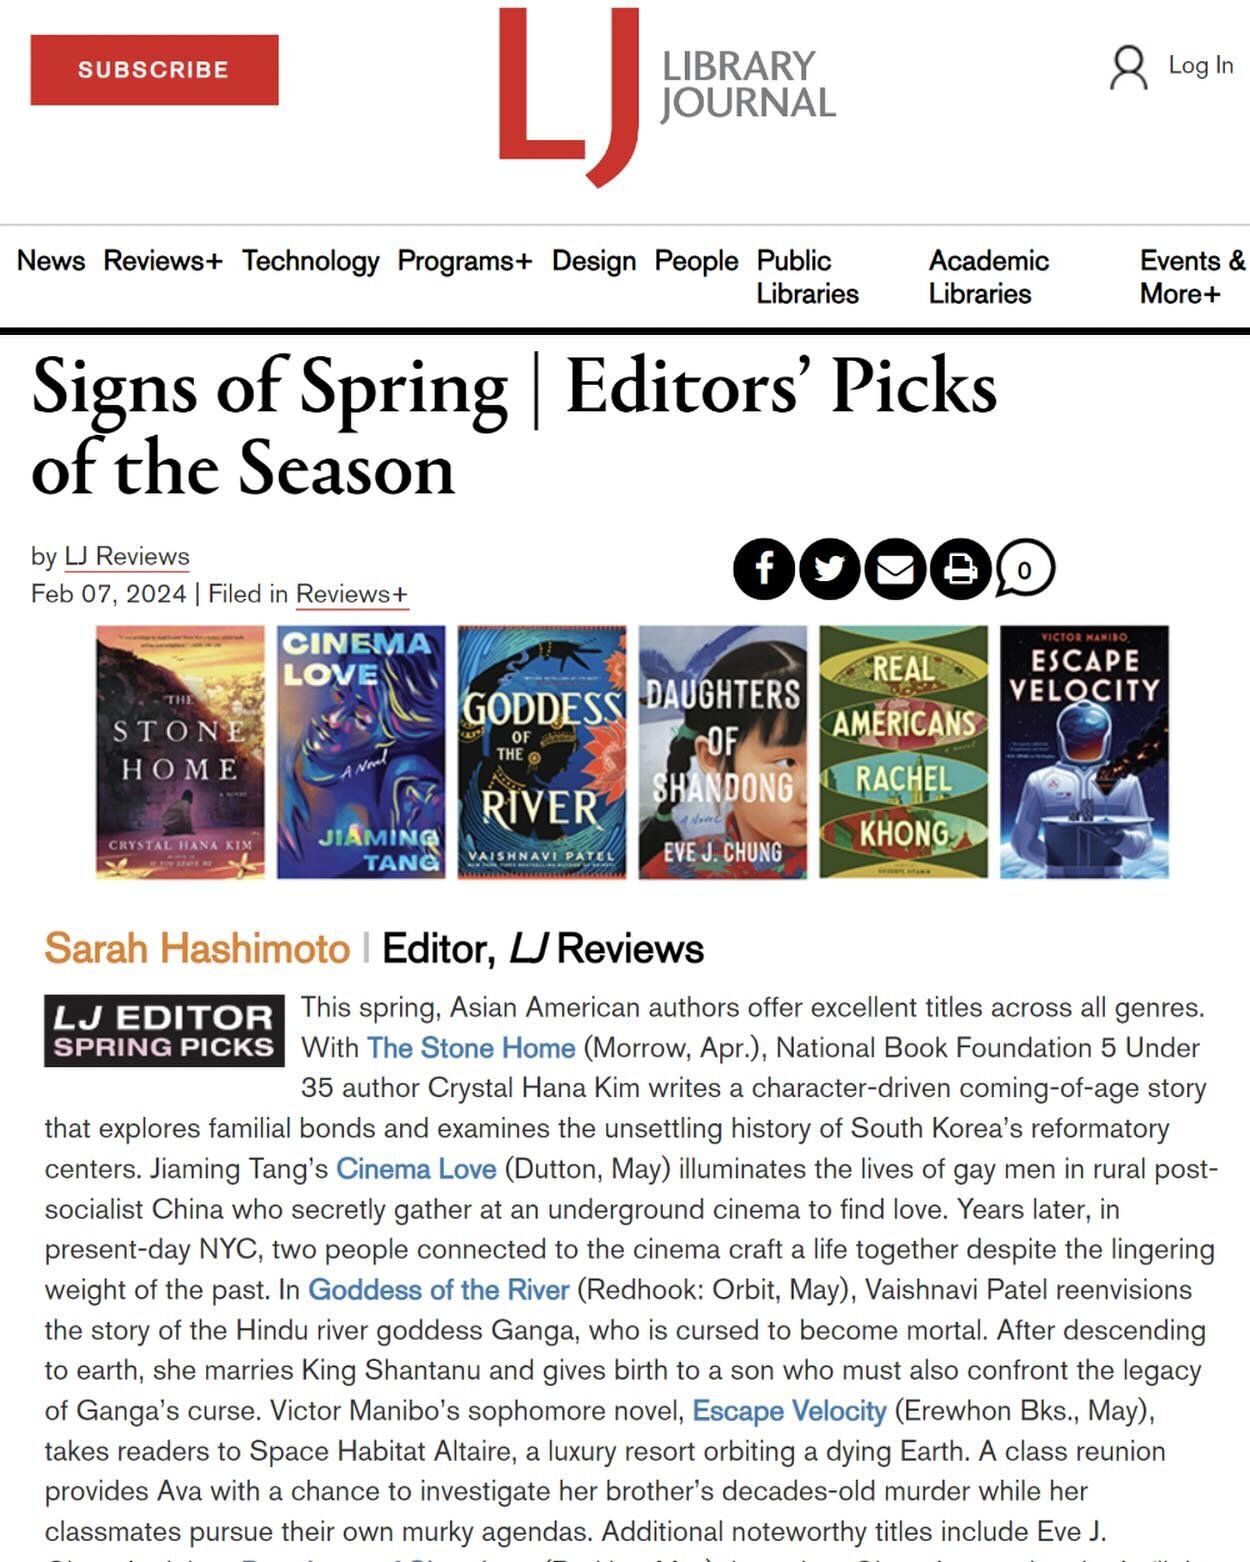 Is it spring already?? ESCAPE VELOCITY is one of LJ&rsquo;s editors&rsquo; picks for the season, alongside titles from @vaishnawrites, @infomocracy, and other brilliant authors. Thank you, @library_journal! View the full list in my ig story